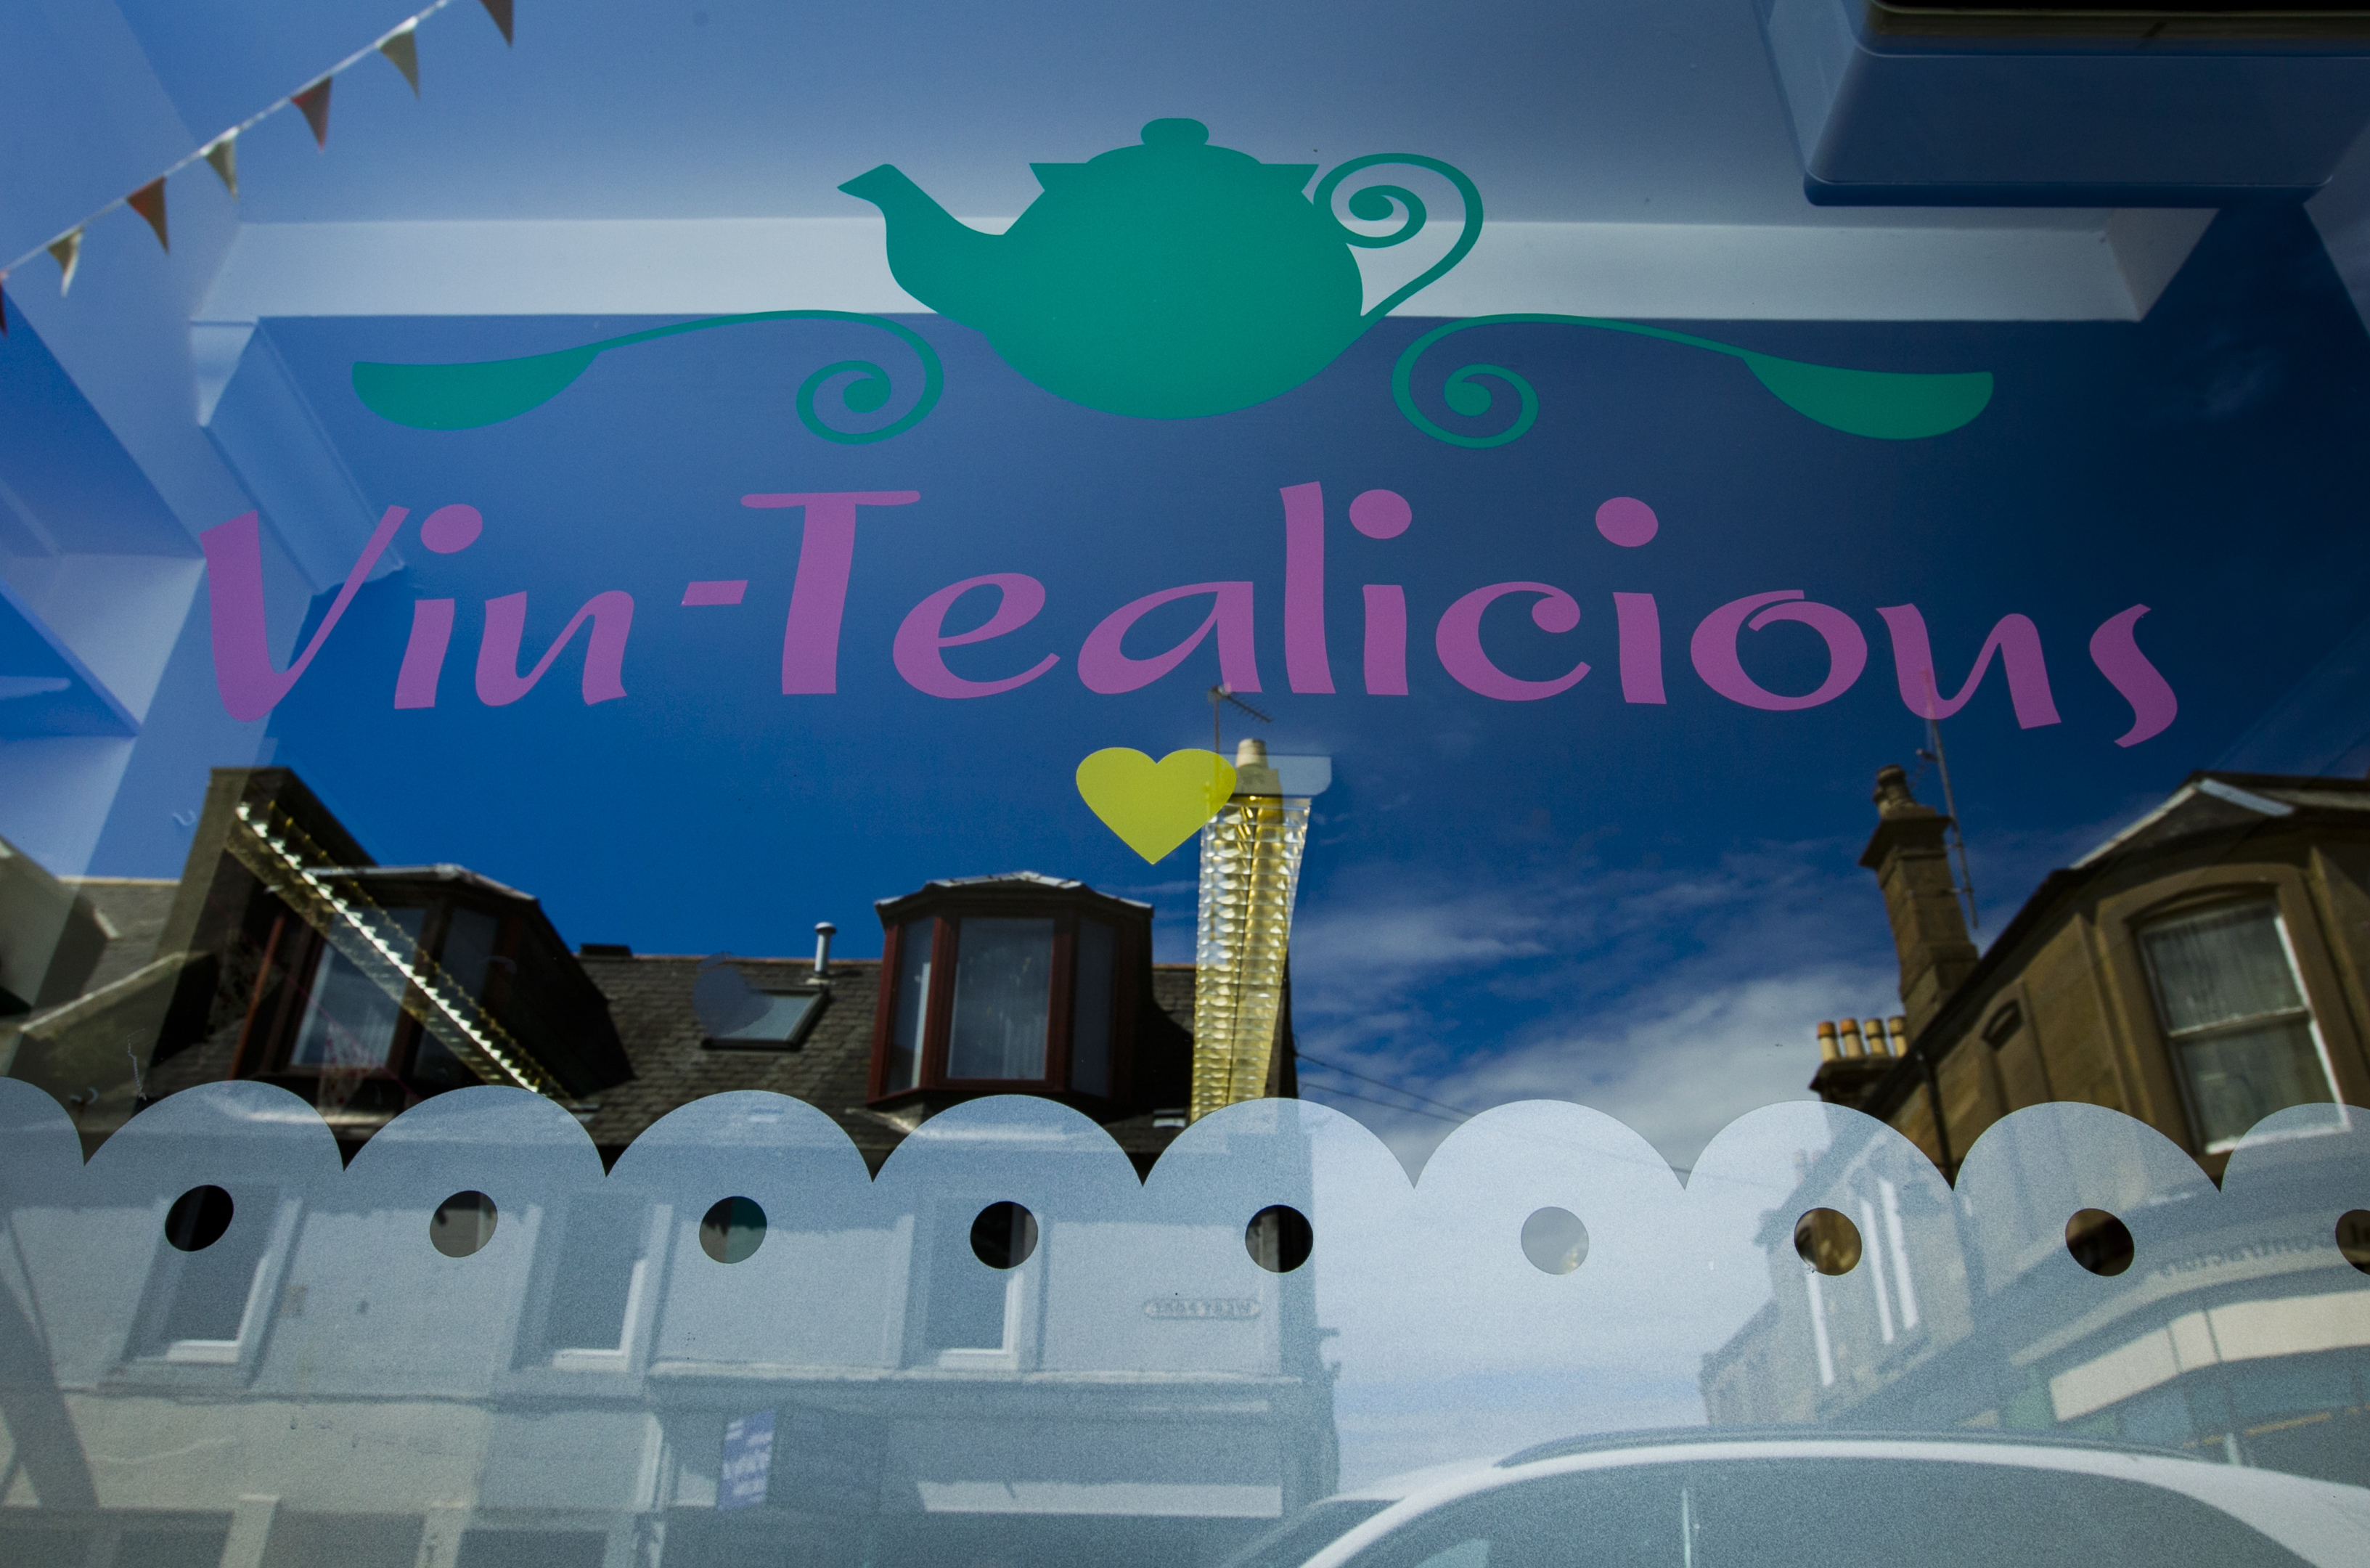 Vin-Tealicious cafe in Arbroath (Andrew Cawley)